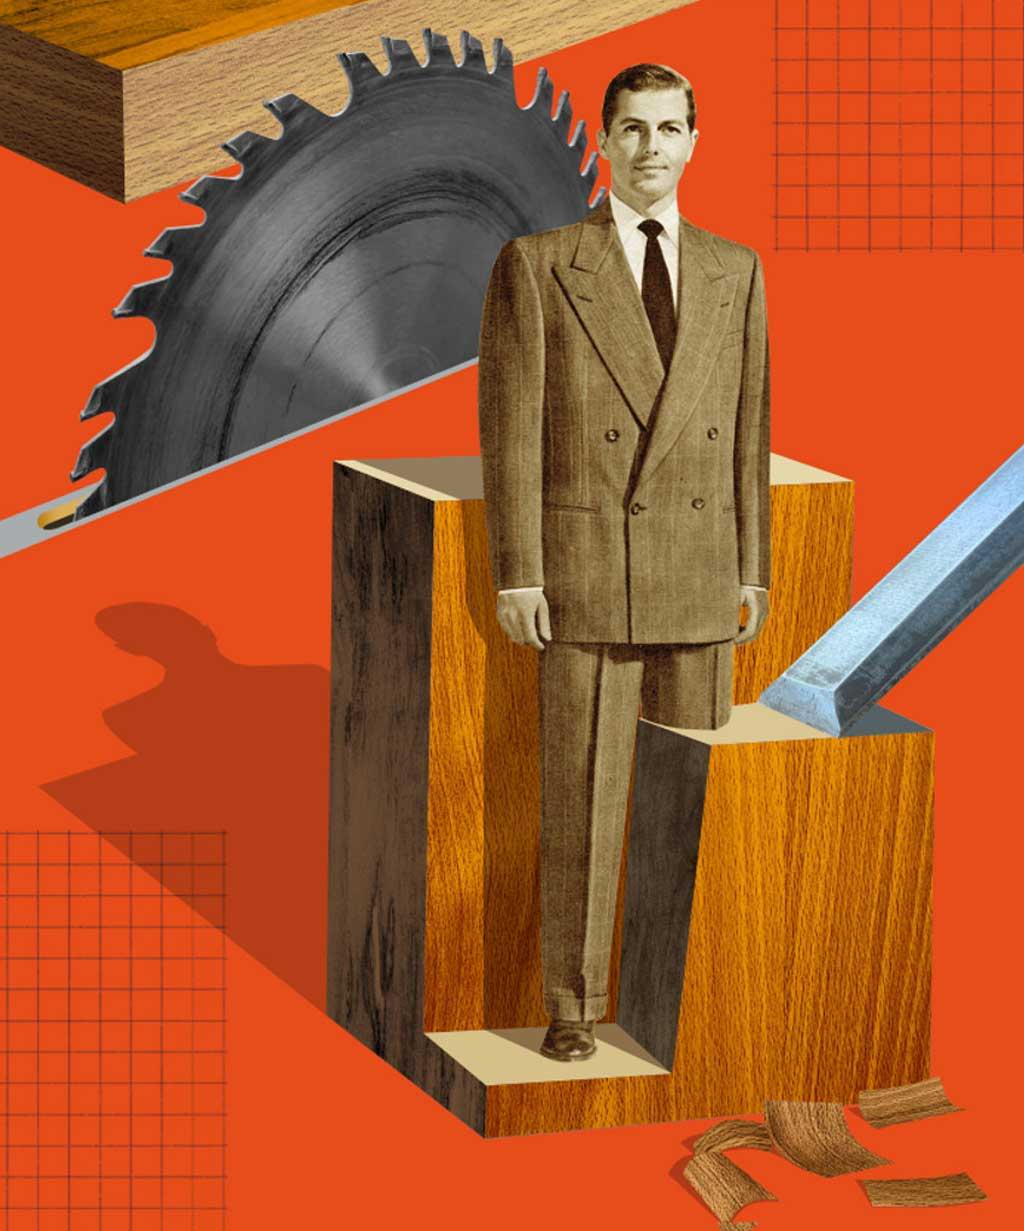 Vintage style editorial collage made in Photoshop featuring businessman on wood chiseled block with round saw blade behind him